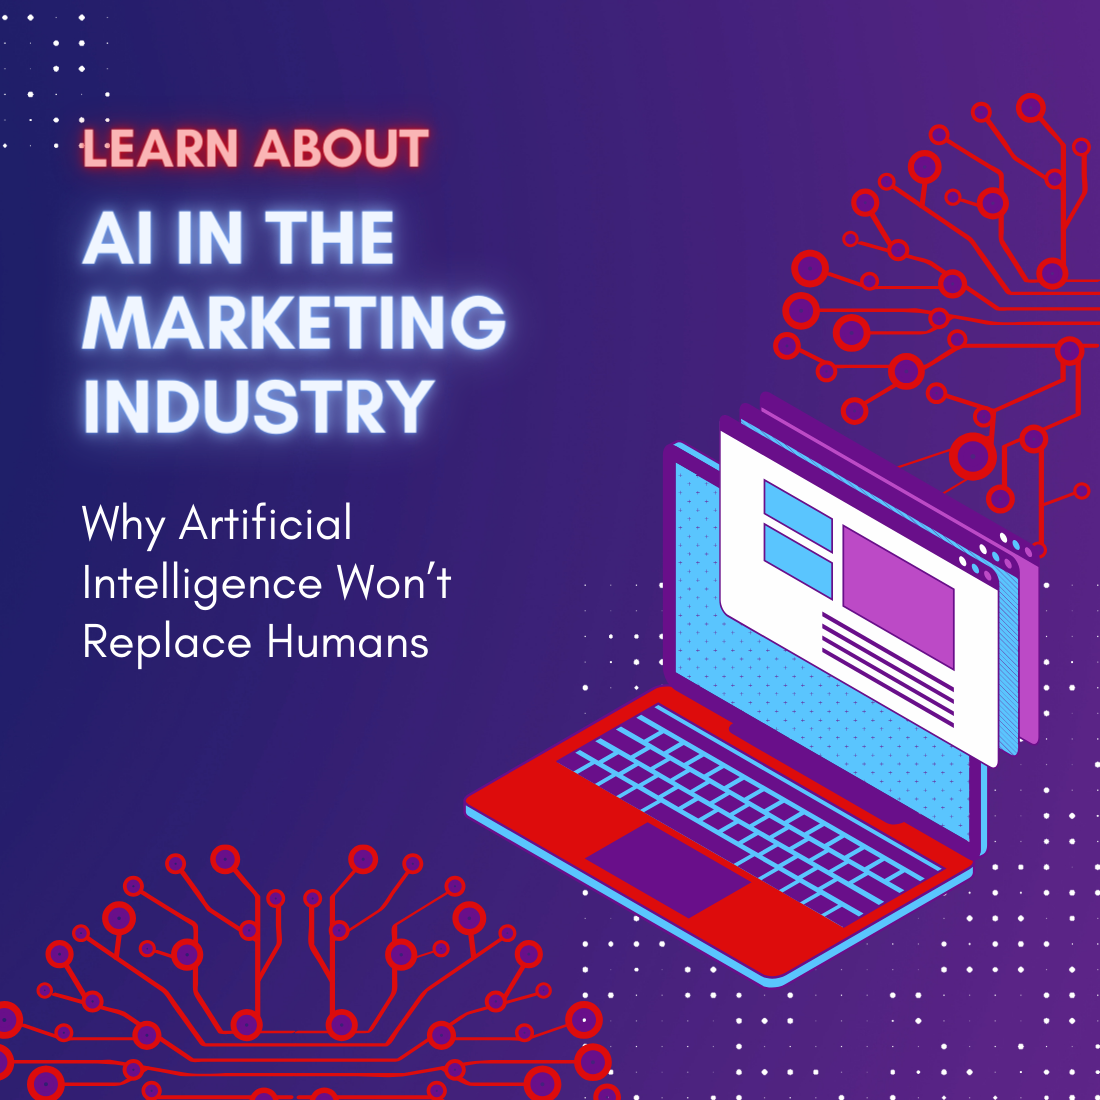 Artificial intelligence lacks the personal touch to replace human in marketing